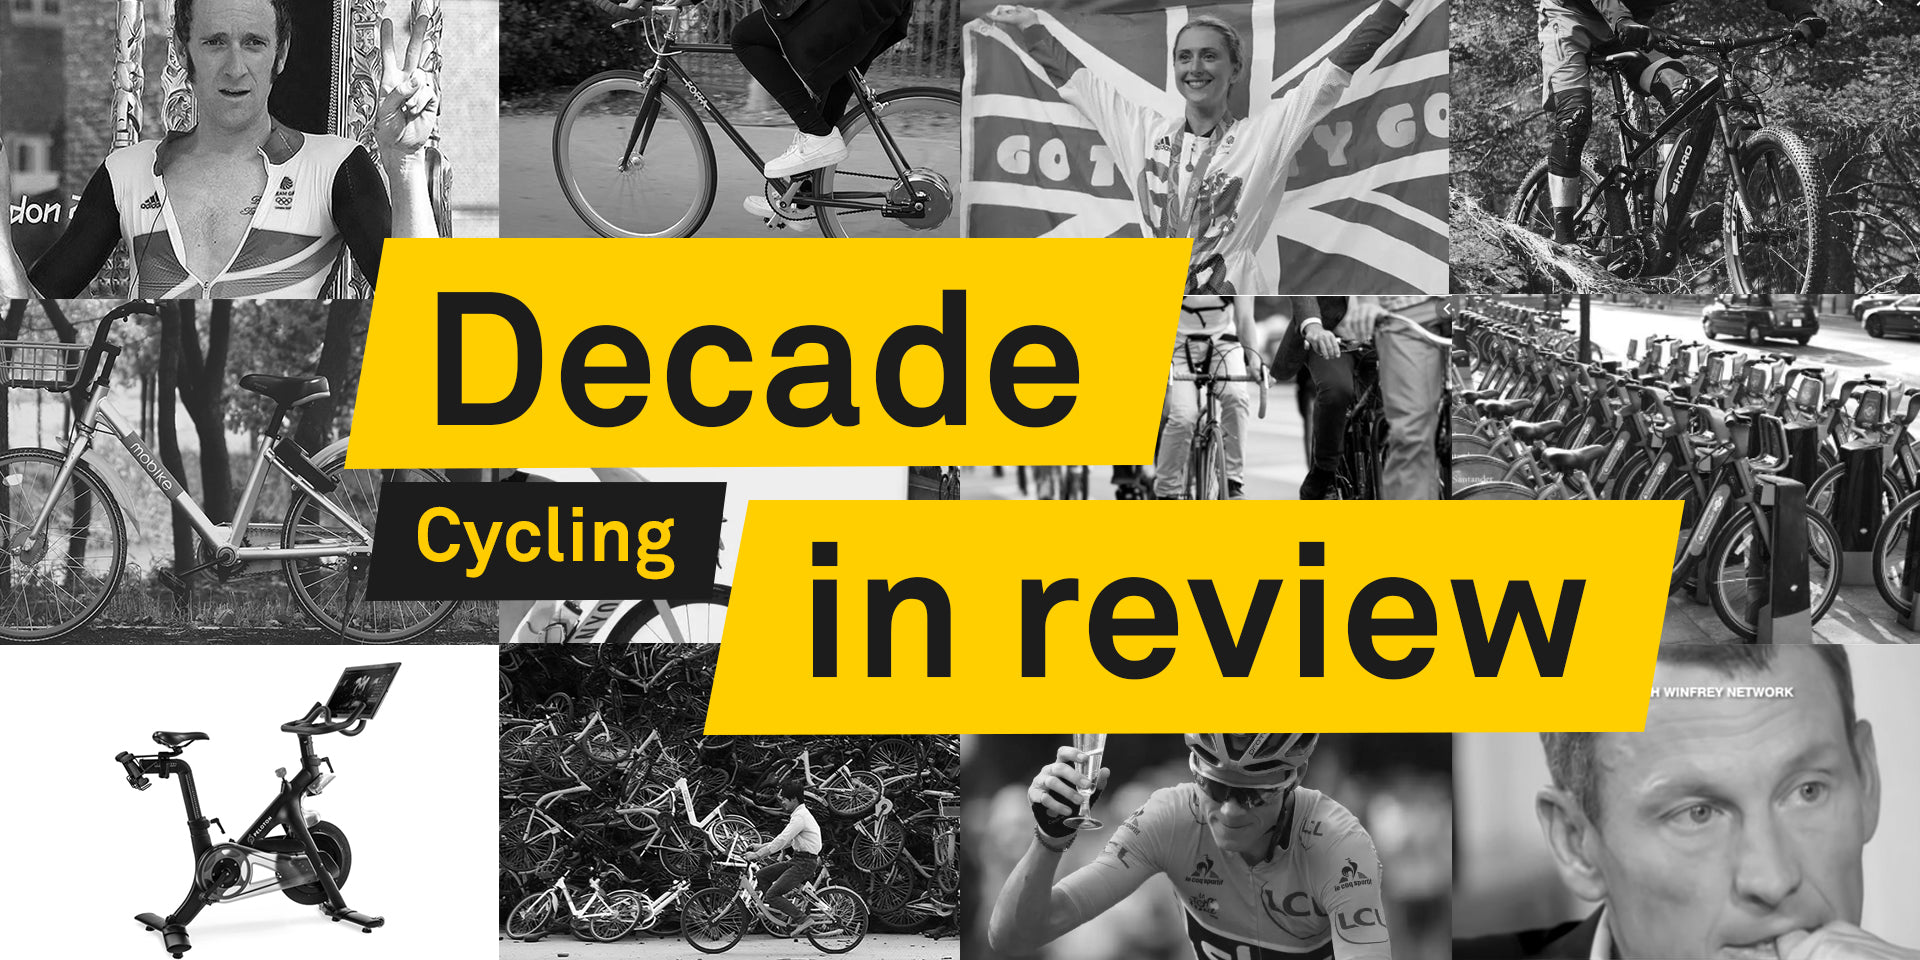 7 Moments that defined the decade in cycling